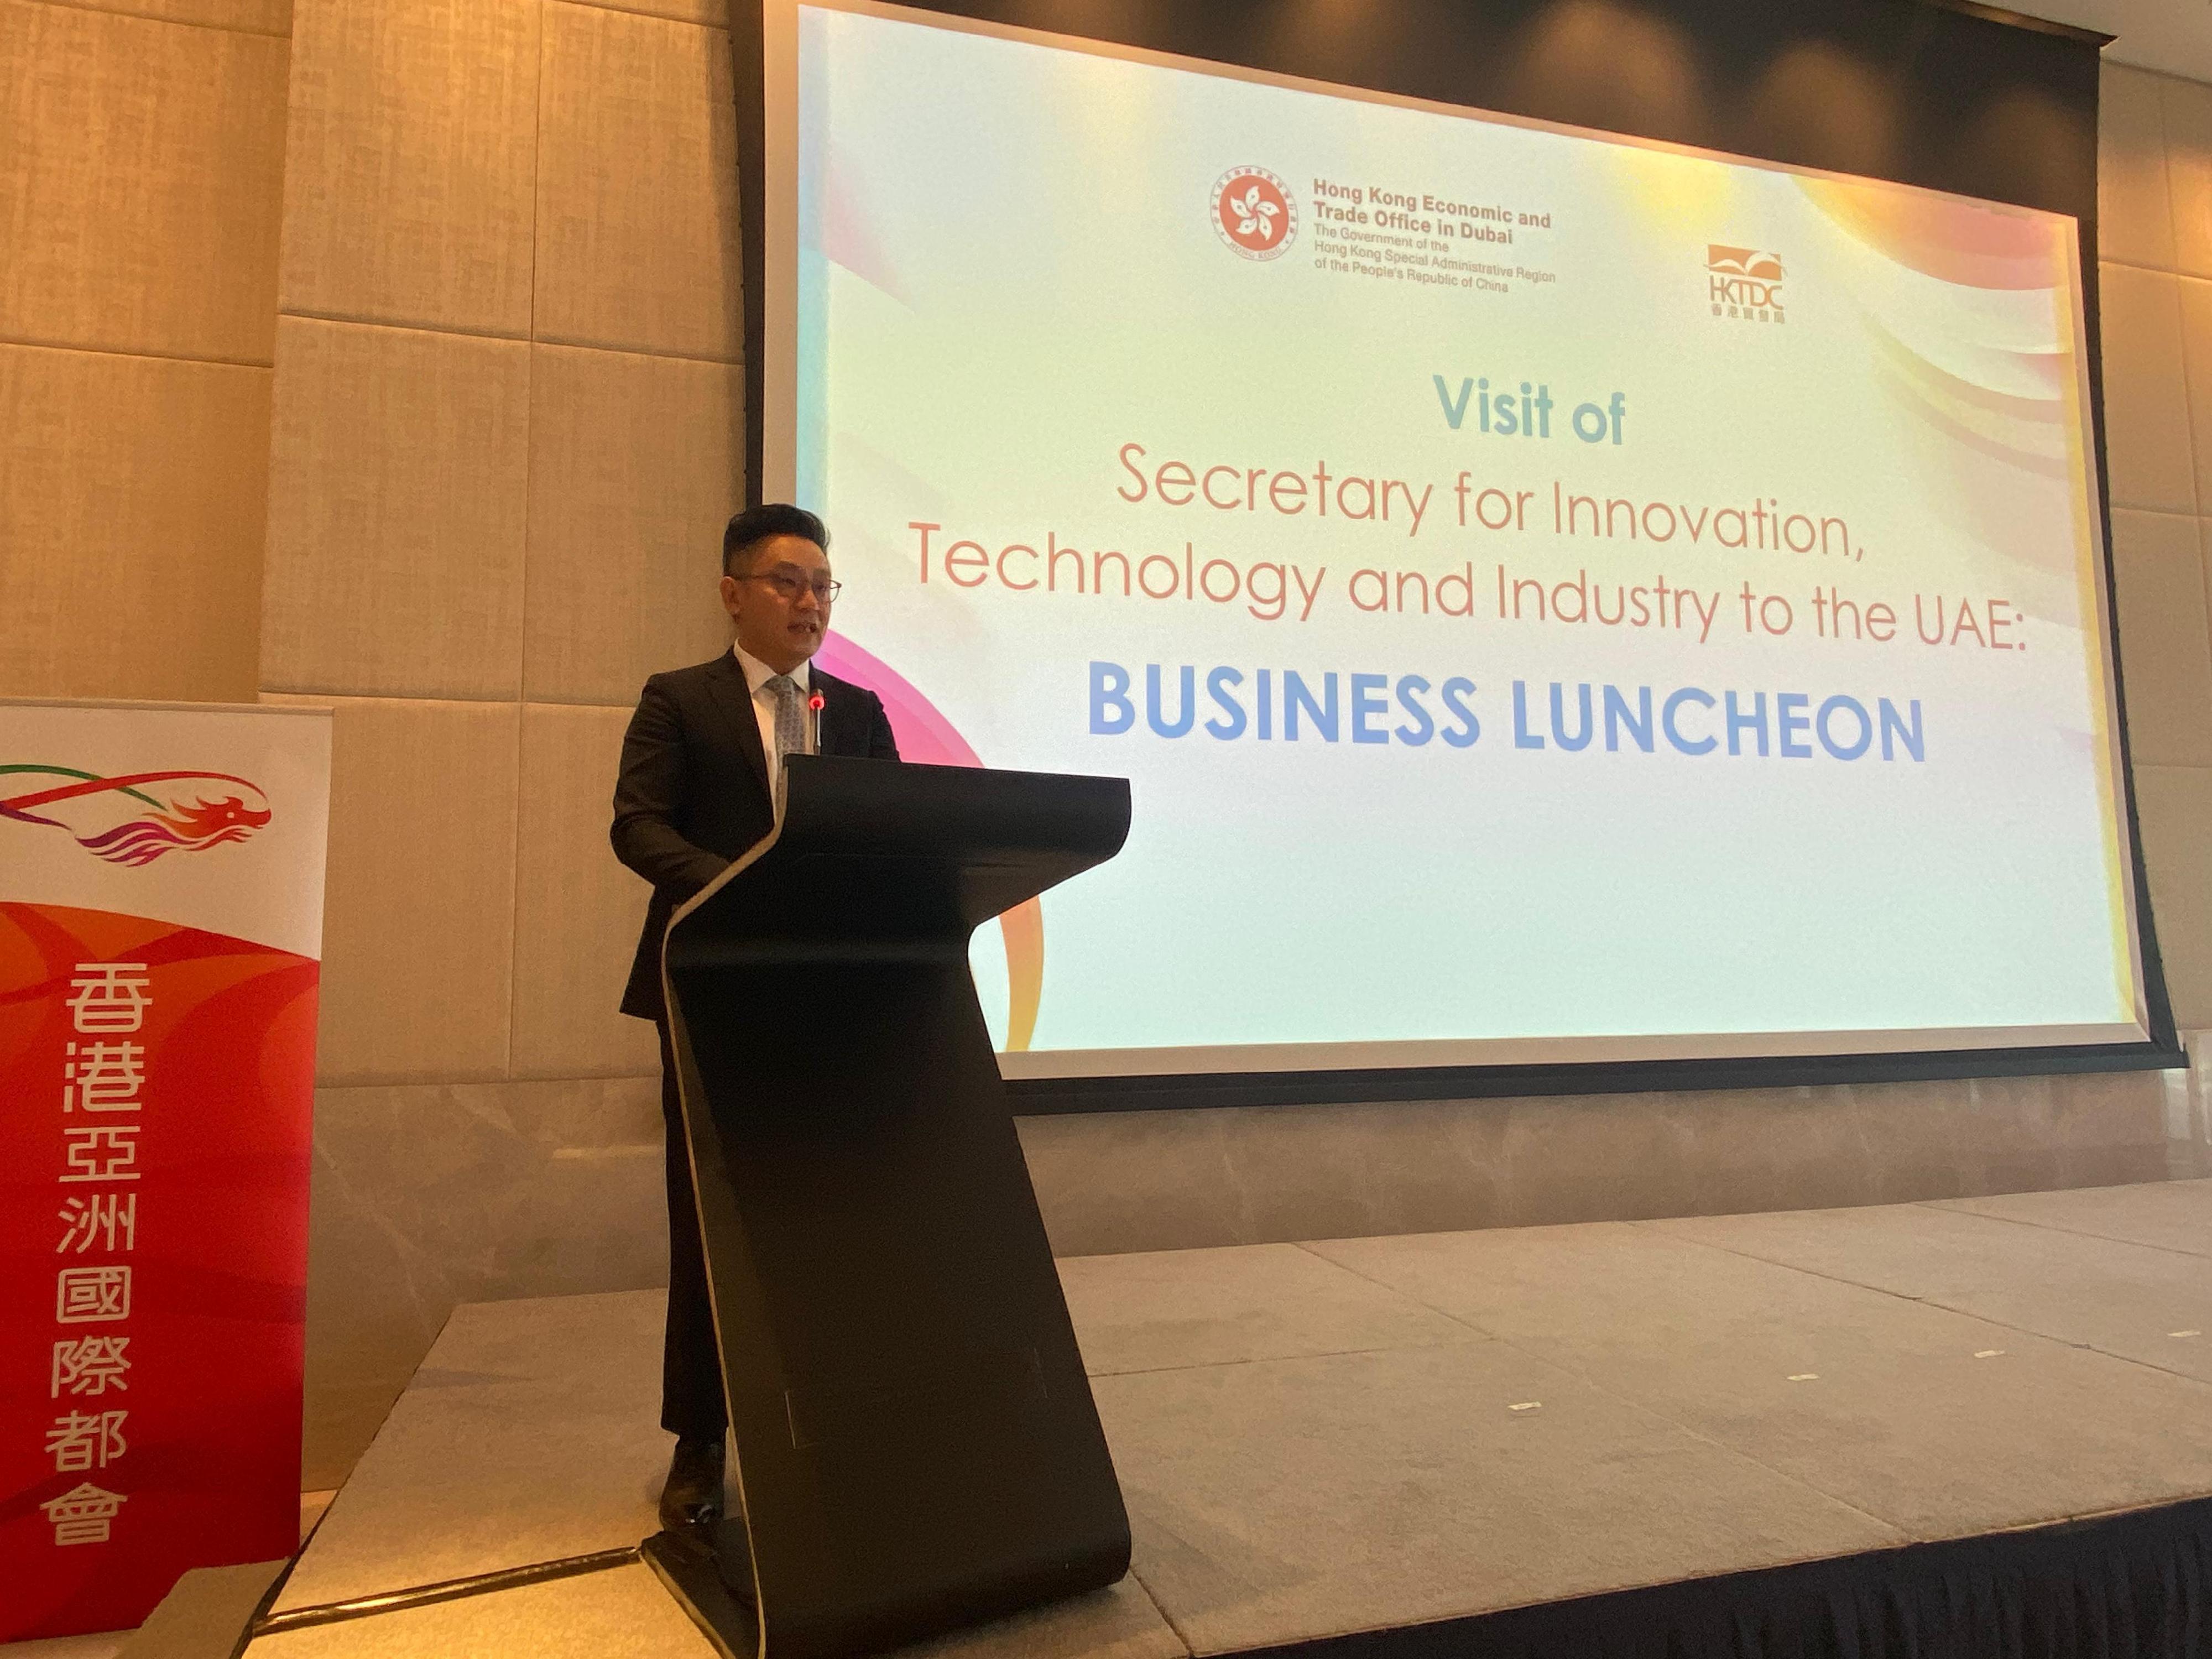 The Hong Kong Economic and Trade Office in Dubai (Dubai ETO) hosted a business luncheon in Dubai, the United Arab Emirates, on March 6 (Dubai time). The event was co-organised by the Hong Kong Trade Development Council. Photo shows the Director-General of the Dubai ETO, Mr Damian Lee, delivering welcoming remarks at the luncheon.